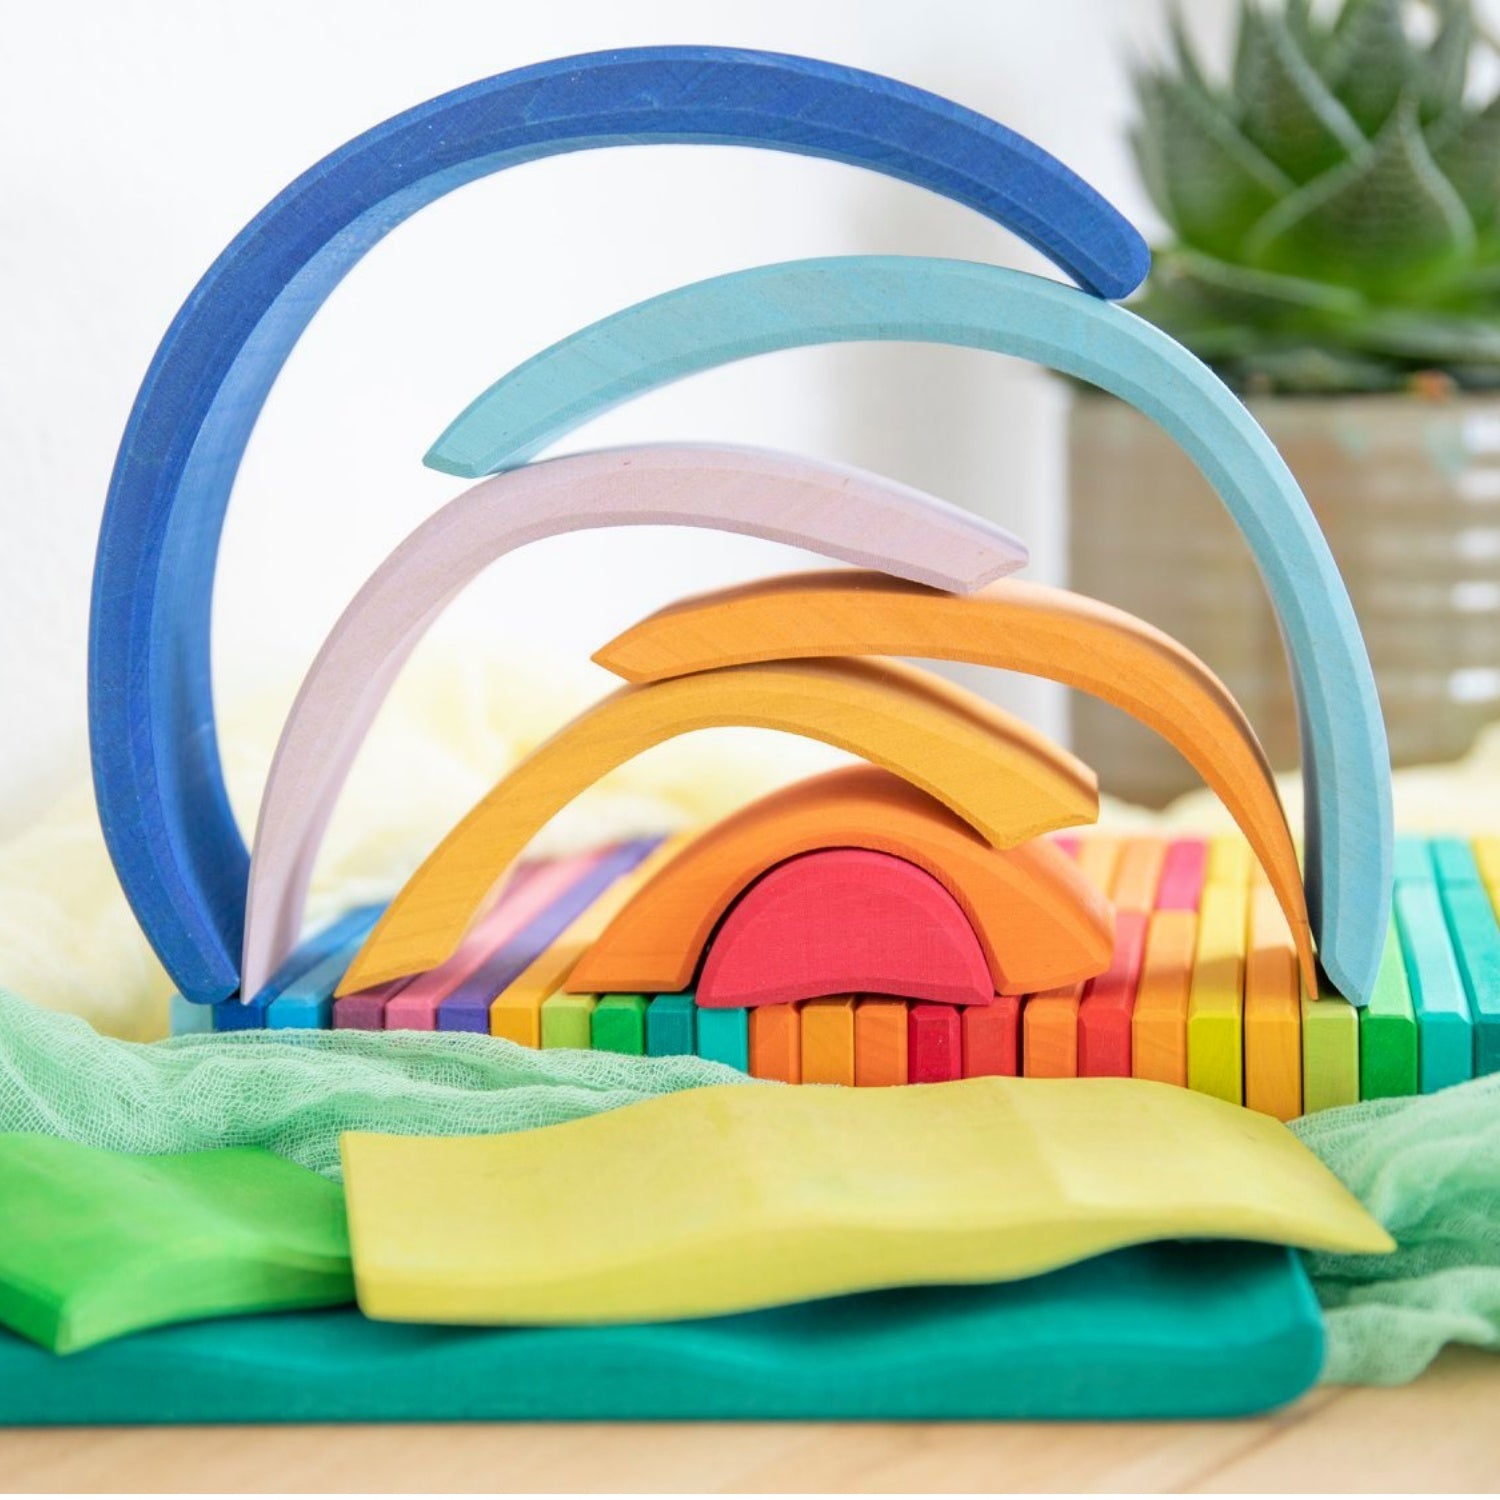 Gluckskafer Blue Wooden Sunrise Set | Imaginative Play Wooden Toys | Waldorf Education and Montessori Education | Lifestyle: Blue Wooden Sunrise Set Arches Stacked Up | BeoVERDE.ie